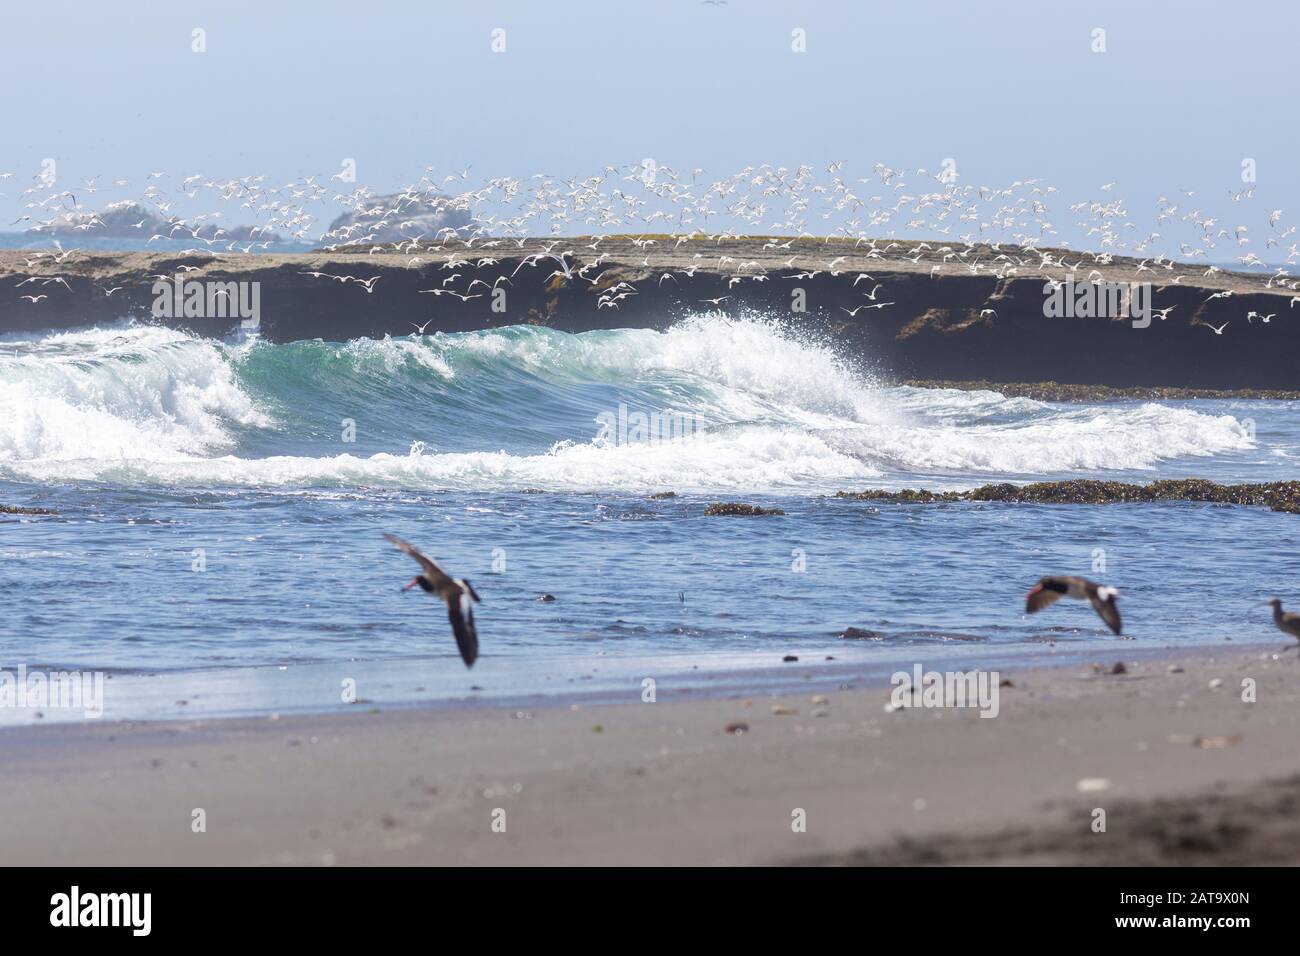 Thousands of birds flying at high speed in front of the sea at the Chilean coastline. An amazing flock of birds flying over the water and the beach Stock Photo